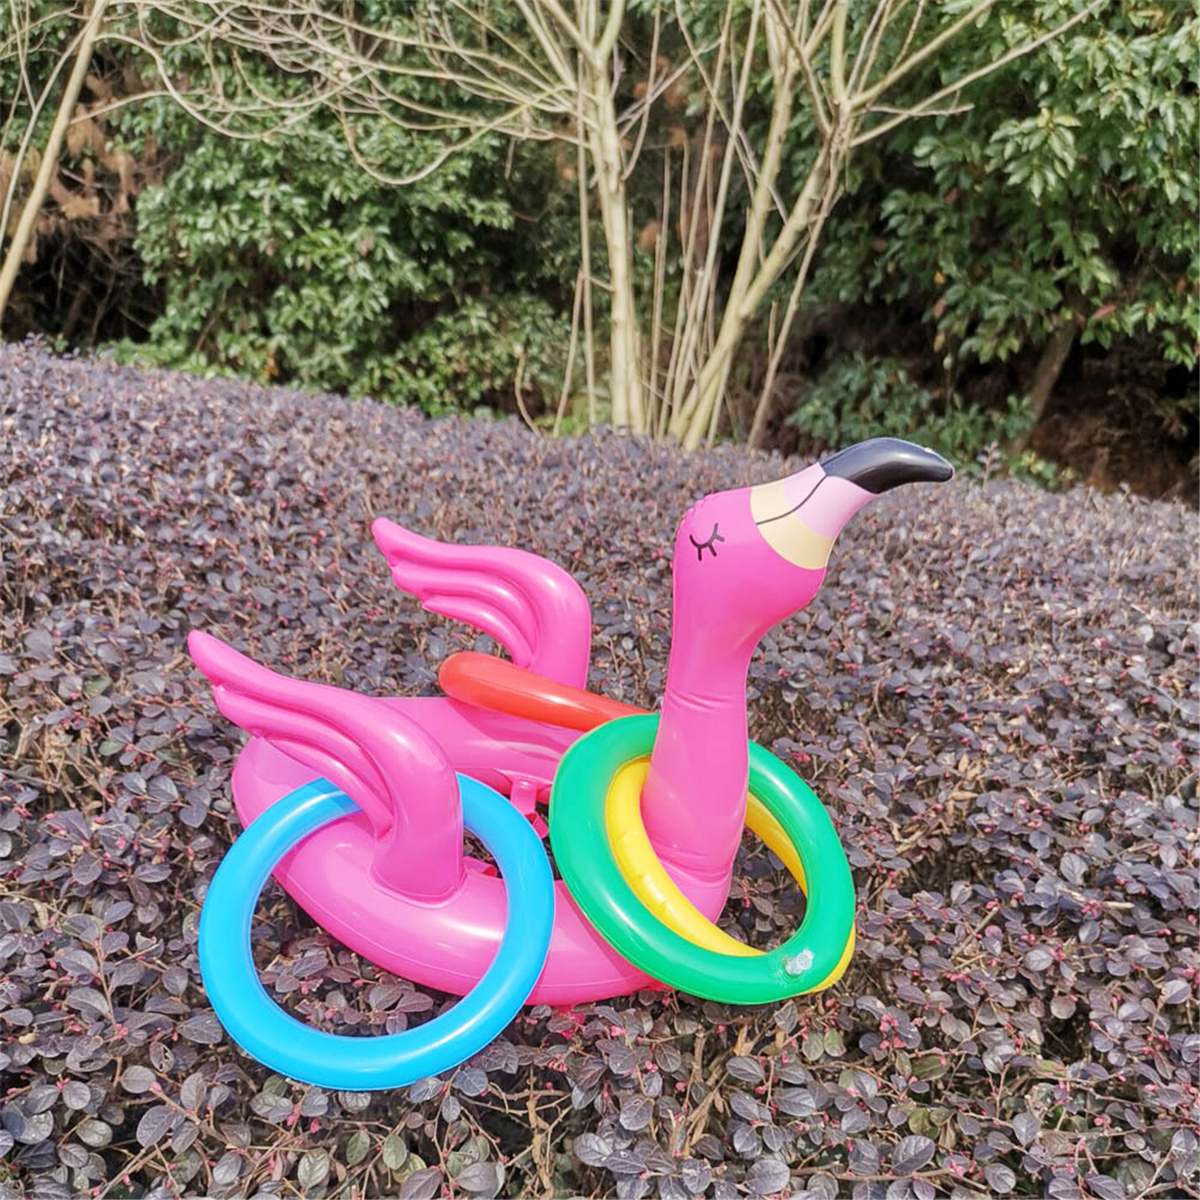 Inflatable-Flamingo-Ring-Toss-Game-For-Family-Party-Pool-Garden-Throwing-Toys-1626091-10